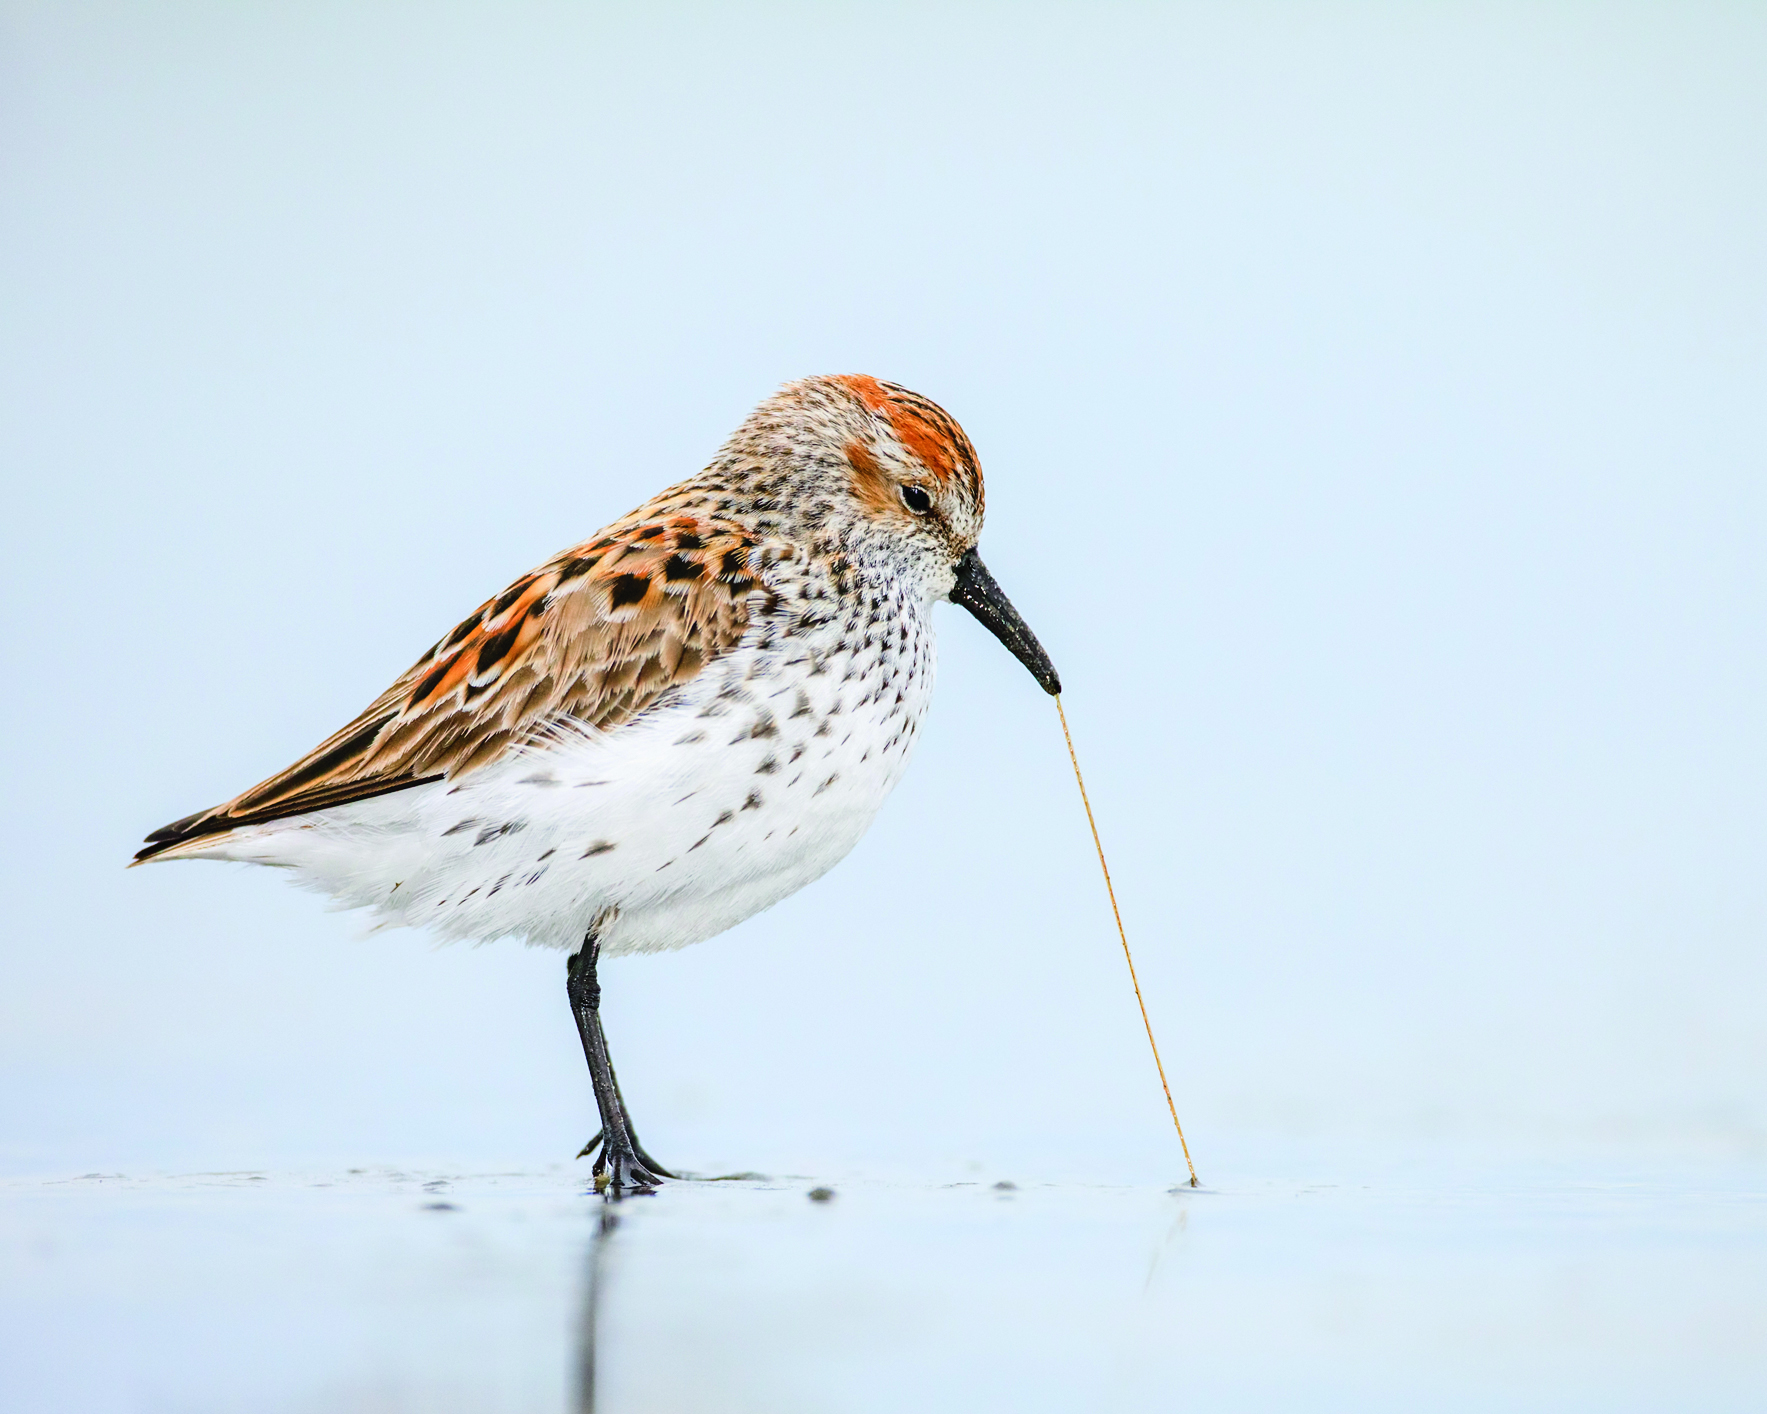 Western Sandpiper pulling a worm out of the sand